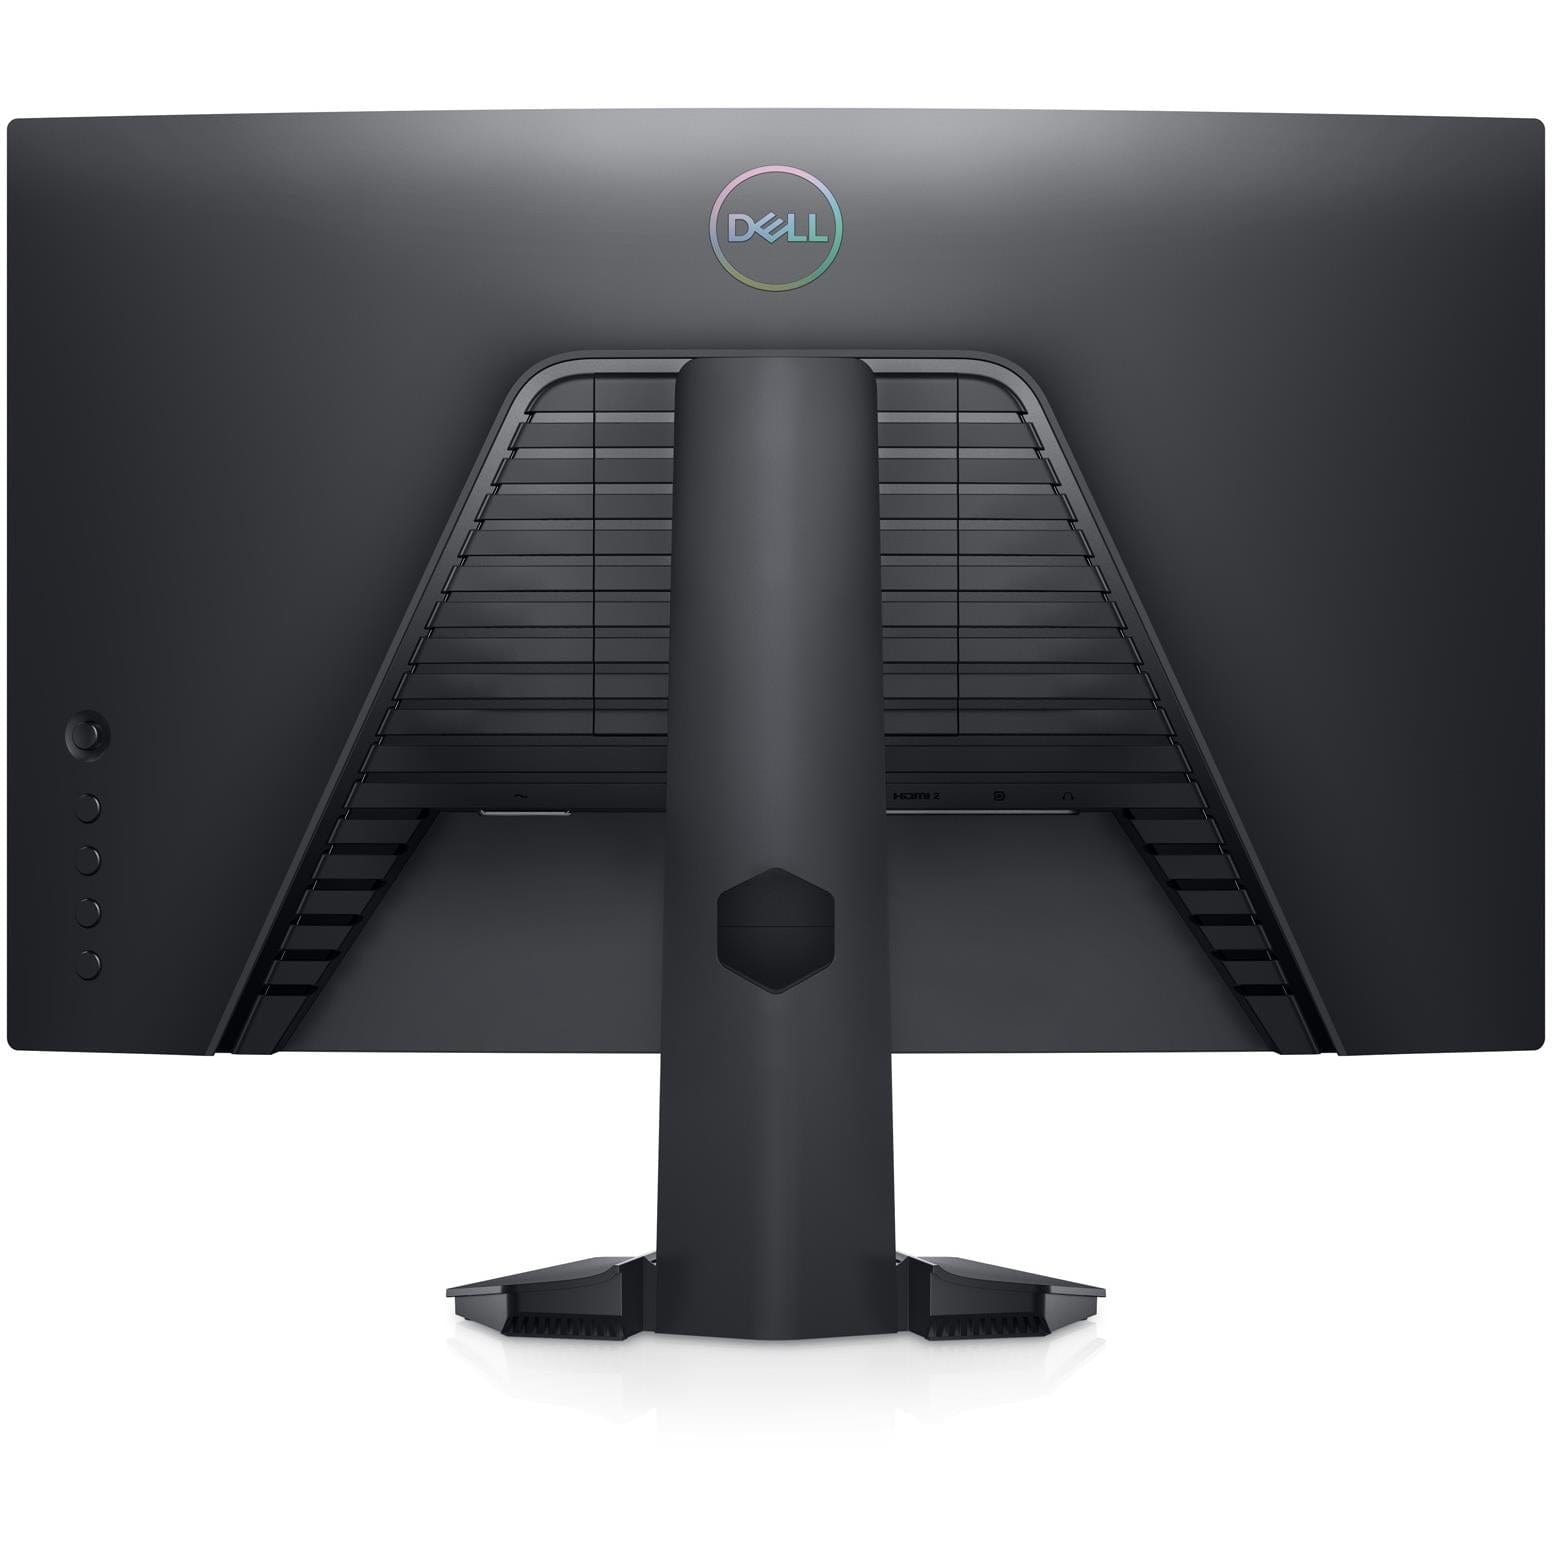 Dell 24" Full HD 165Hz Curved Gaming Monitor